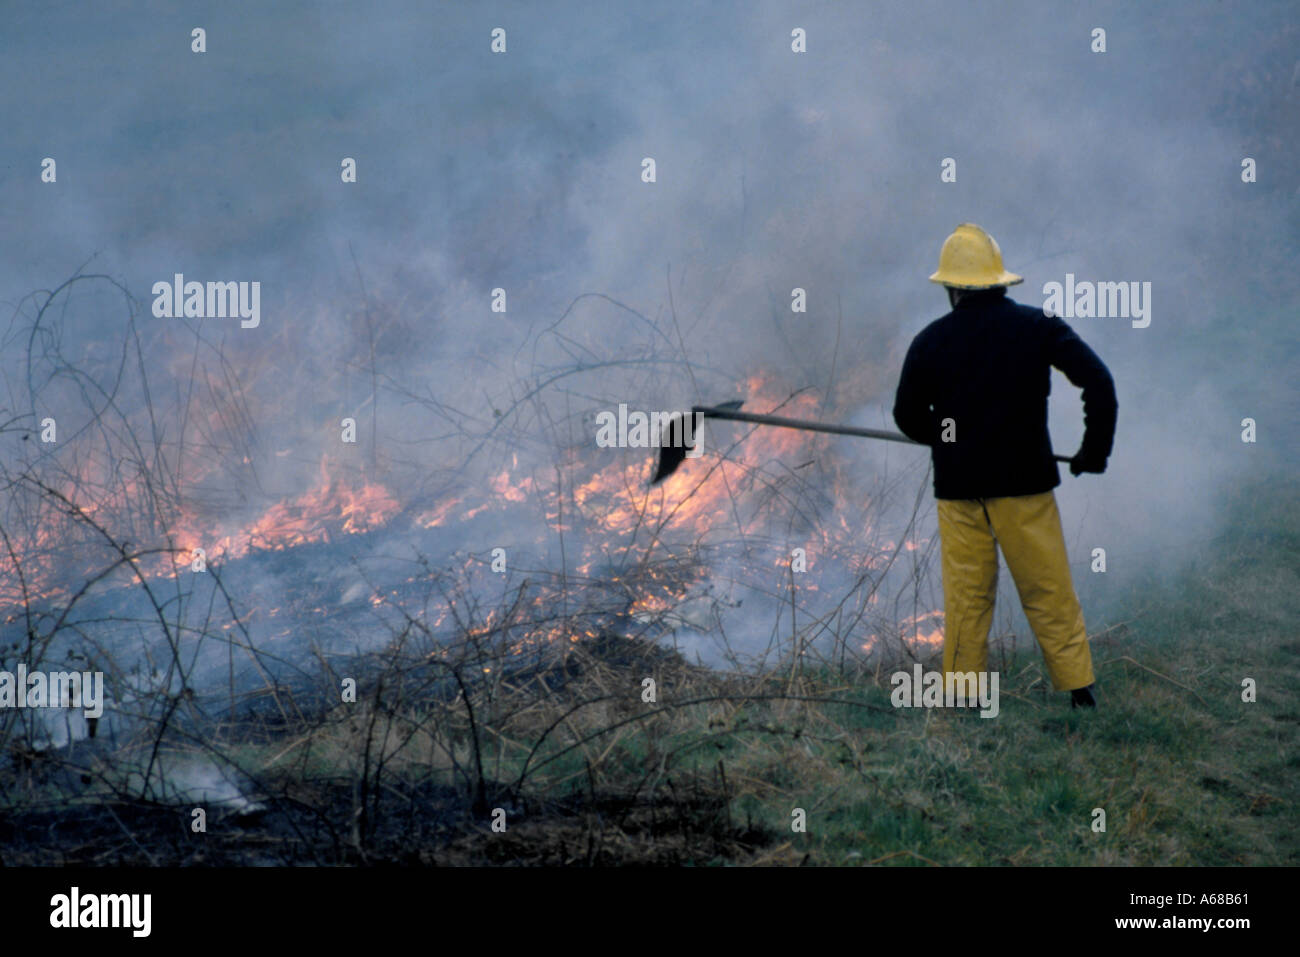 Fireman dealing with a heath fire, Alnmouth, Northumberland, England, UK. Stock Photo